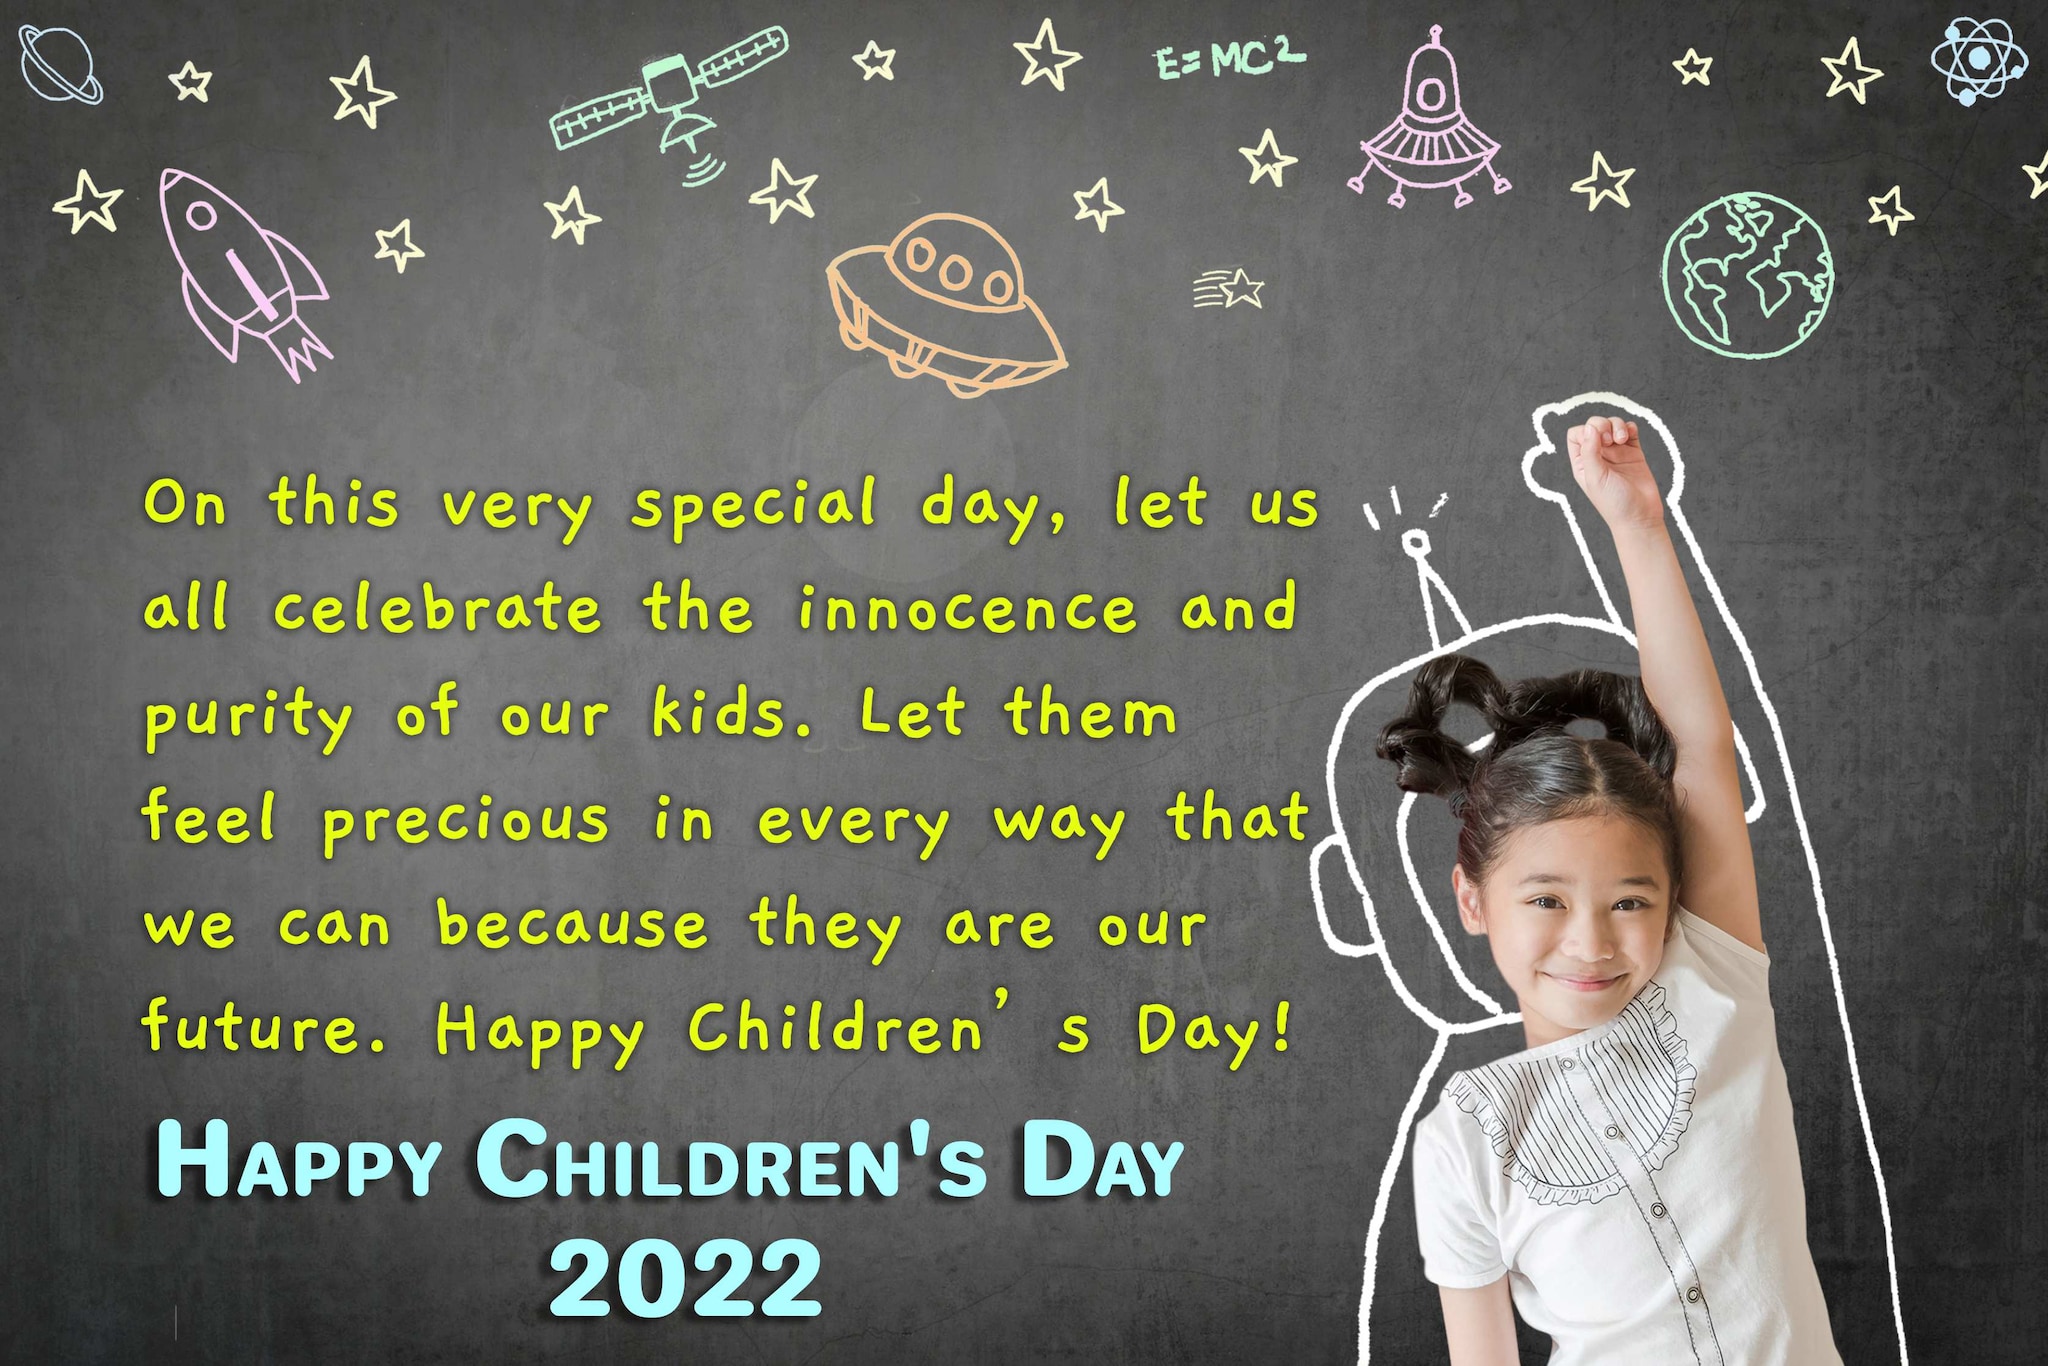 Happy Children's Day 2022: Best Wishes, messages, quotes, greetings, SMS, WhatsApp and Facebook status to share with your family and friends. (Representative image: Shutterstock)